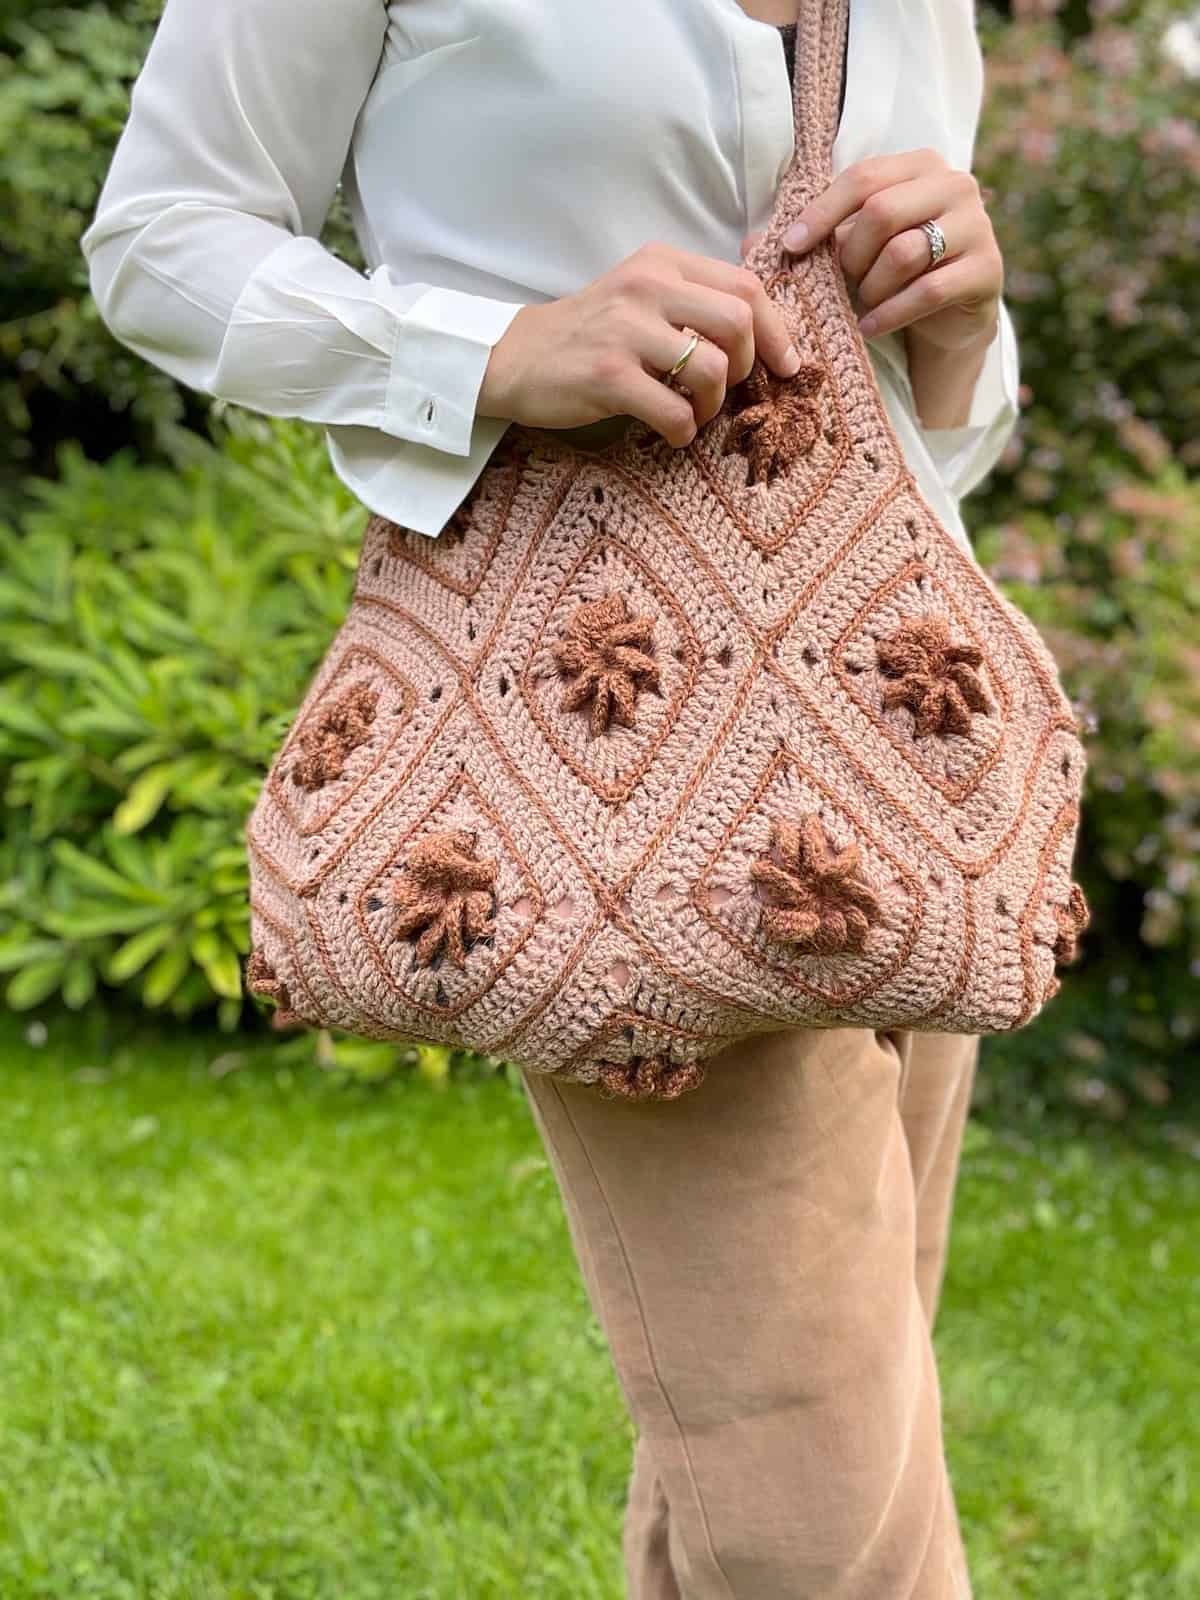 A woman holding a pink crocheted bag.